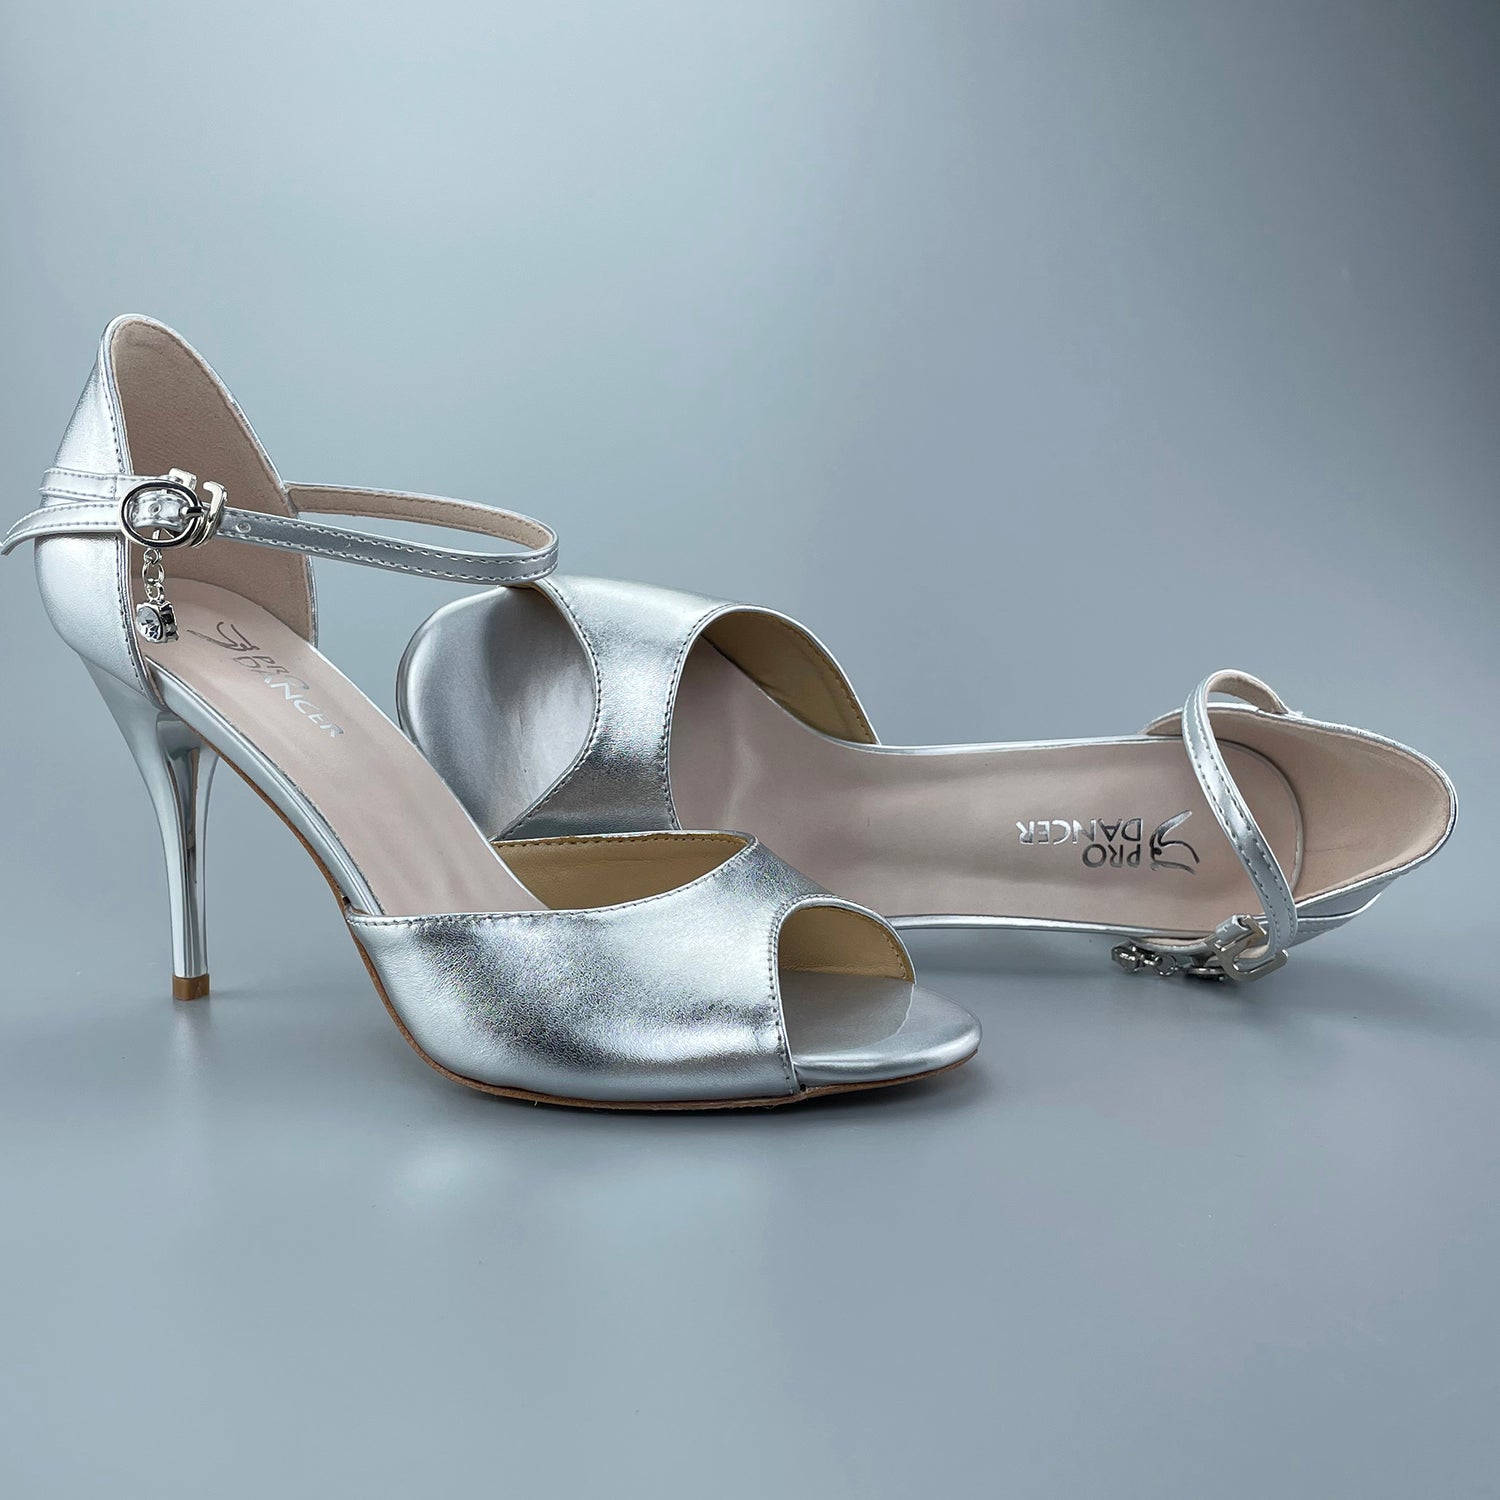 Pro Dancer Tango Shoes silver open-toe salsa heels with leather sole2